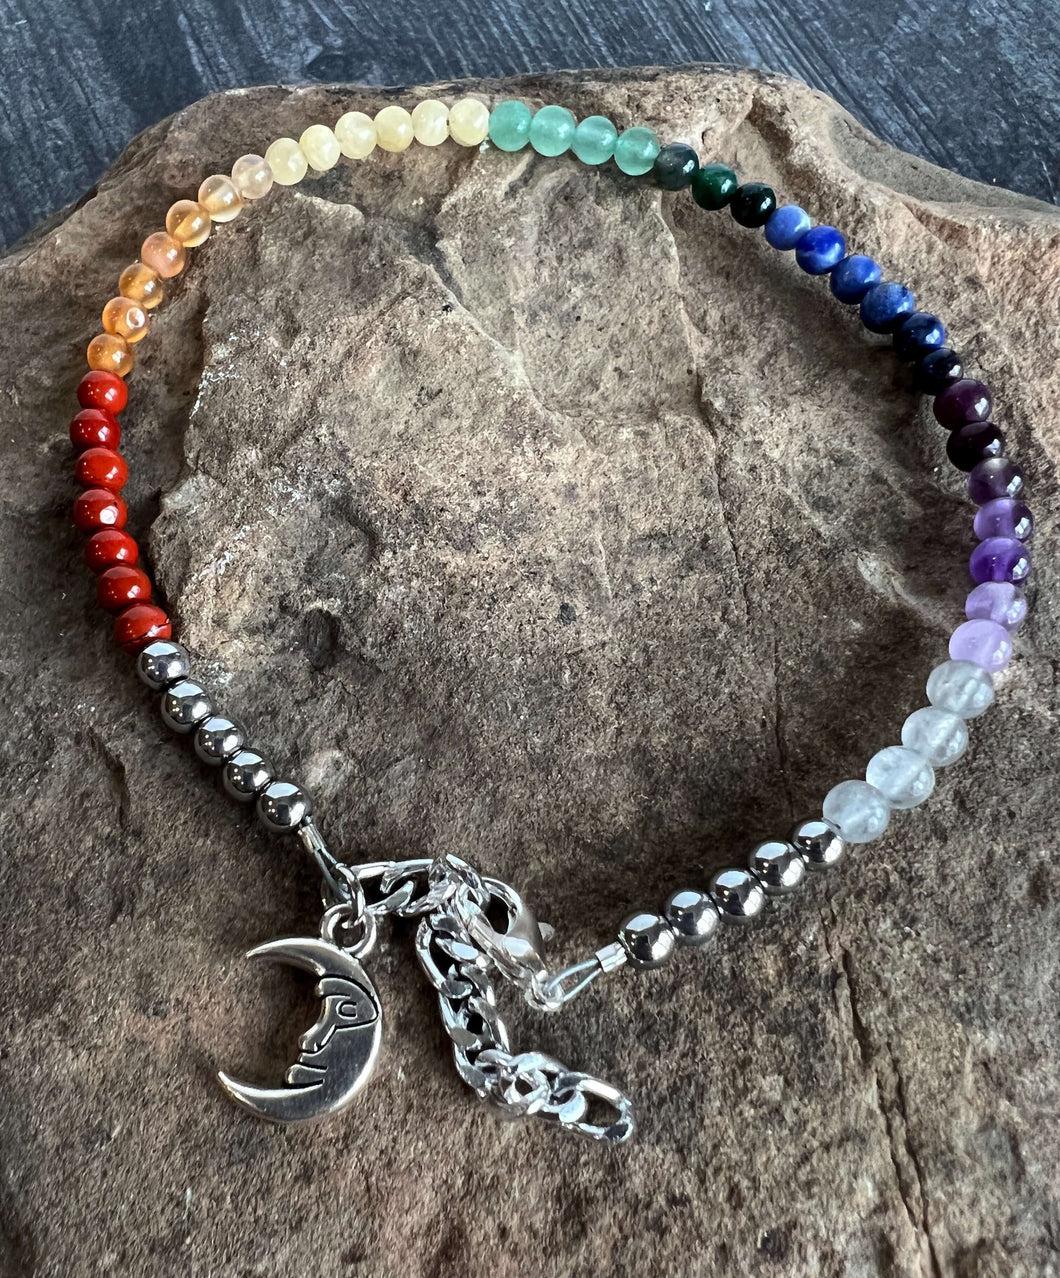 Rainbow Beaded Anklet This anklet is made with a variety of high-quality, natural stones to create a rainbow. The anklet can be a representation of our chakra system and can also be a way to show your pride or support for the LGBTQ+ community. Handmade wi